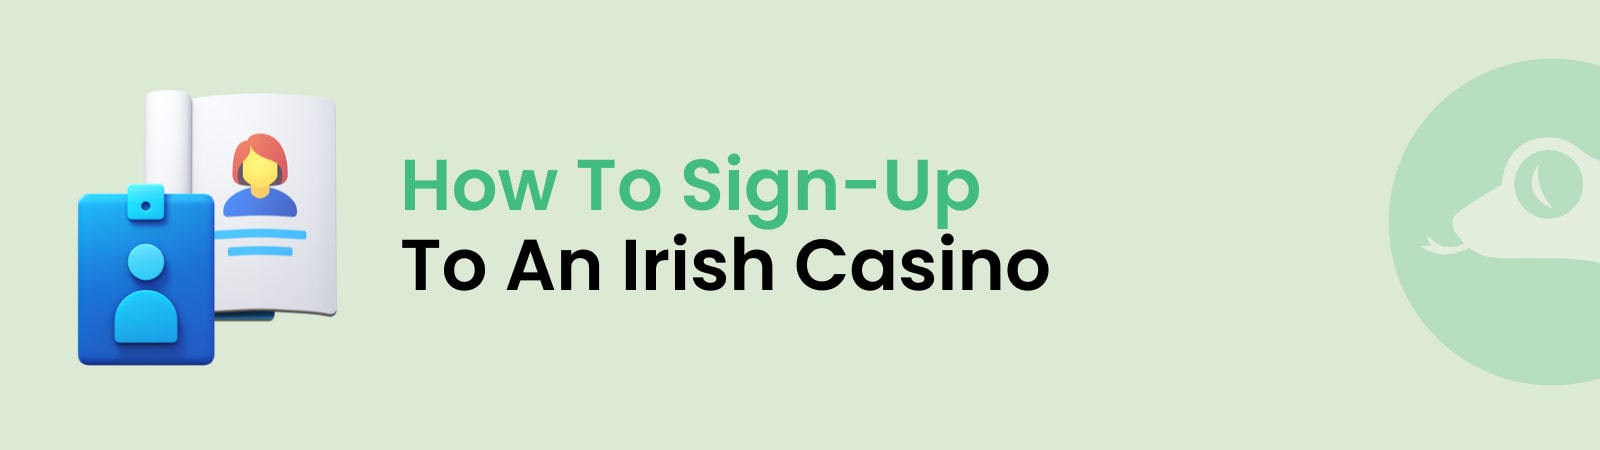 how to sign up to an irish casino